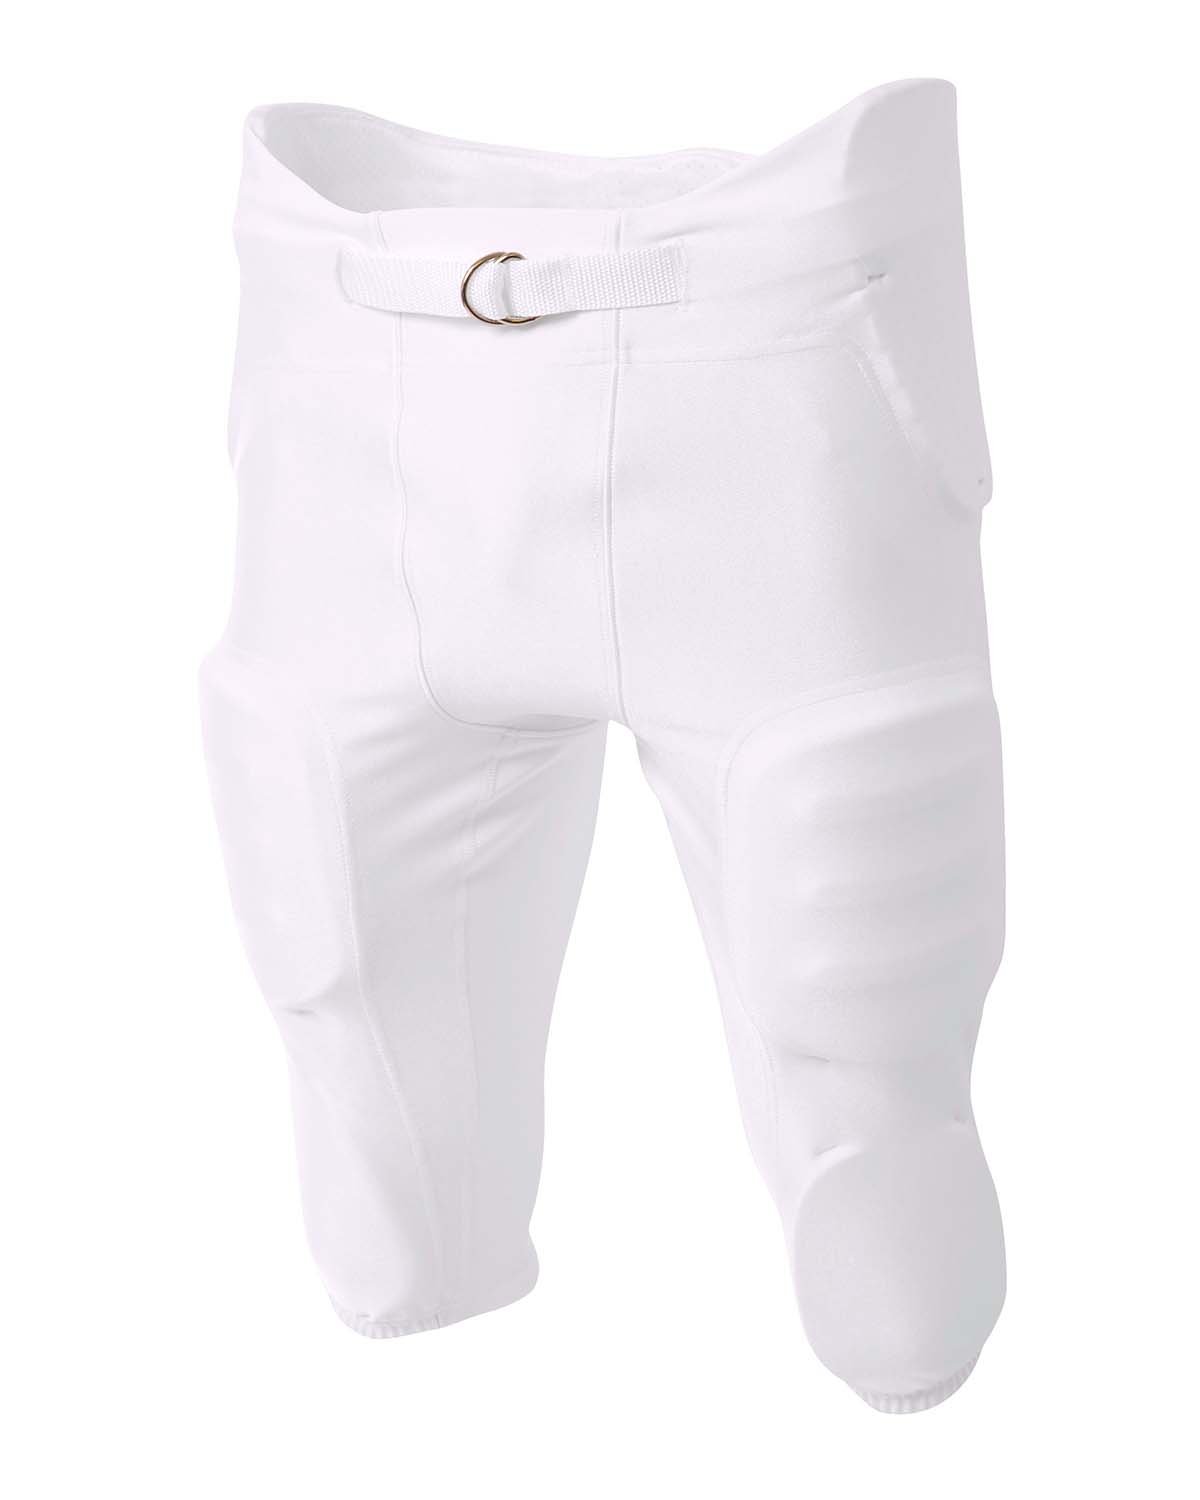 Boys Integrated Zone Football Pant-